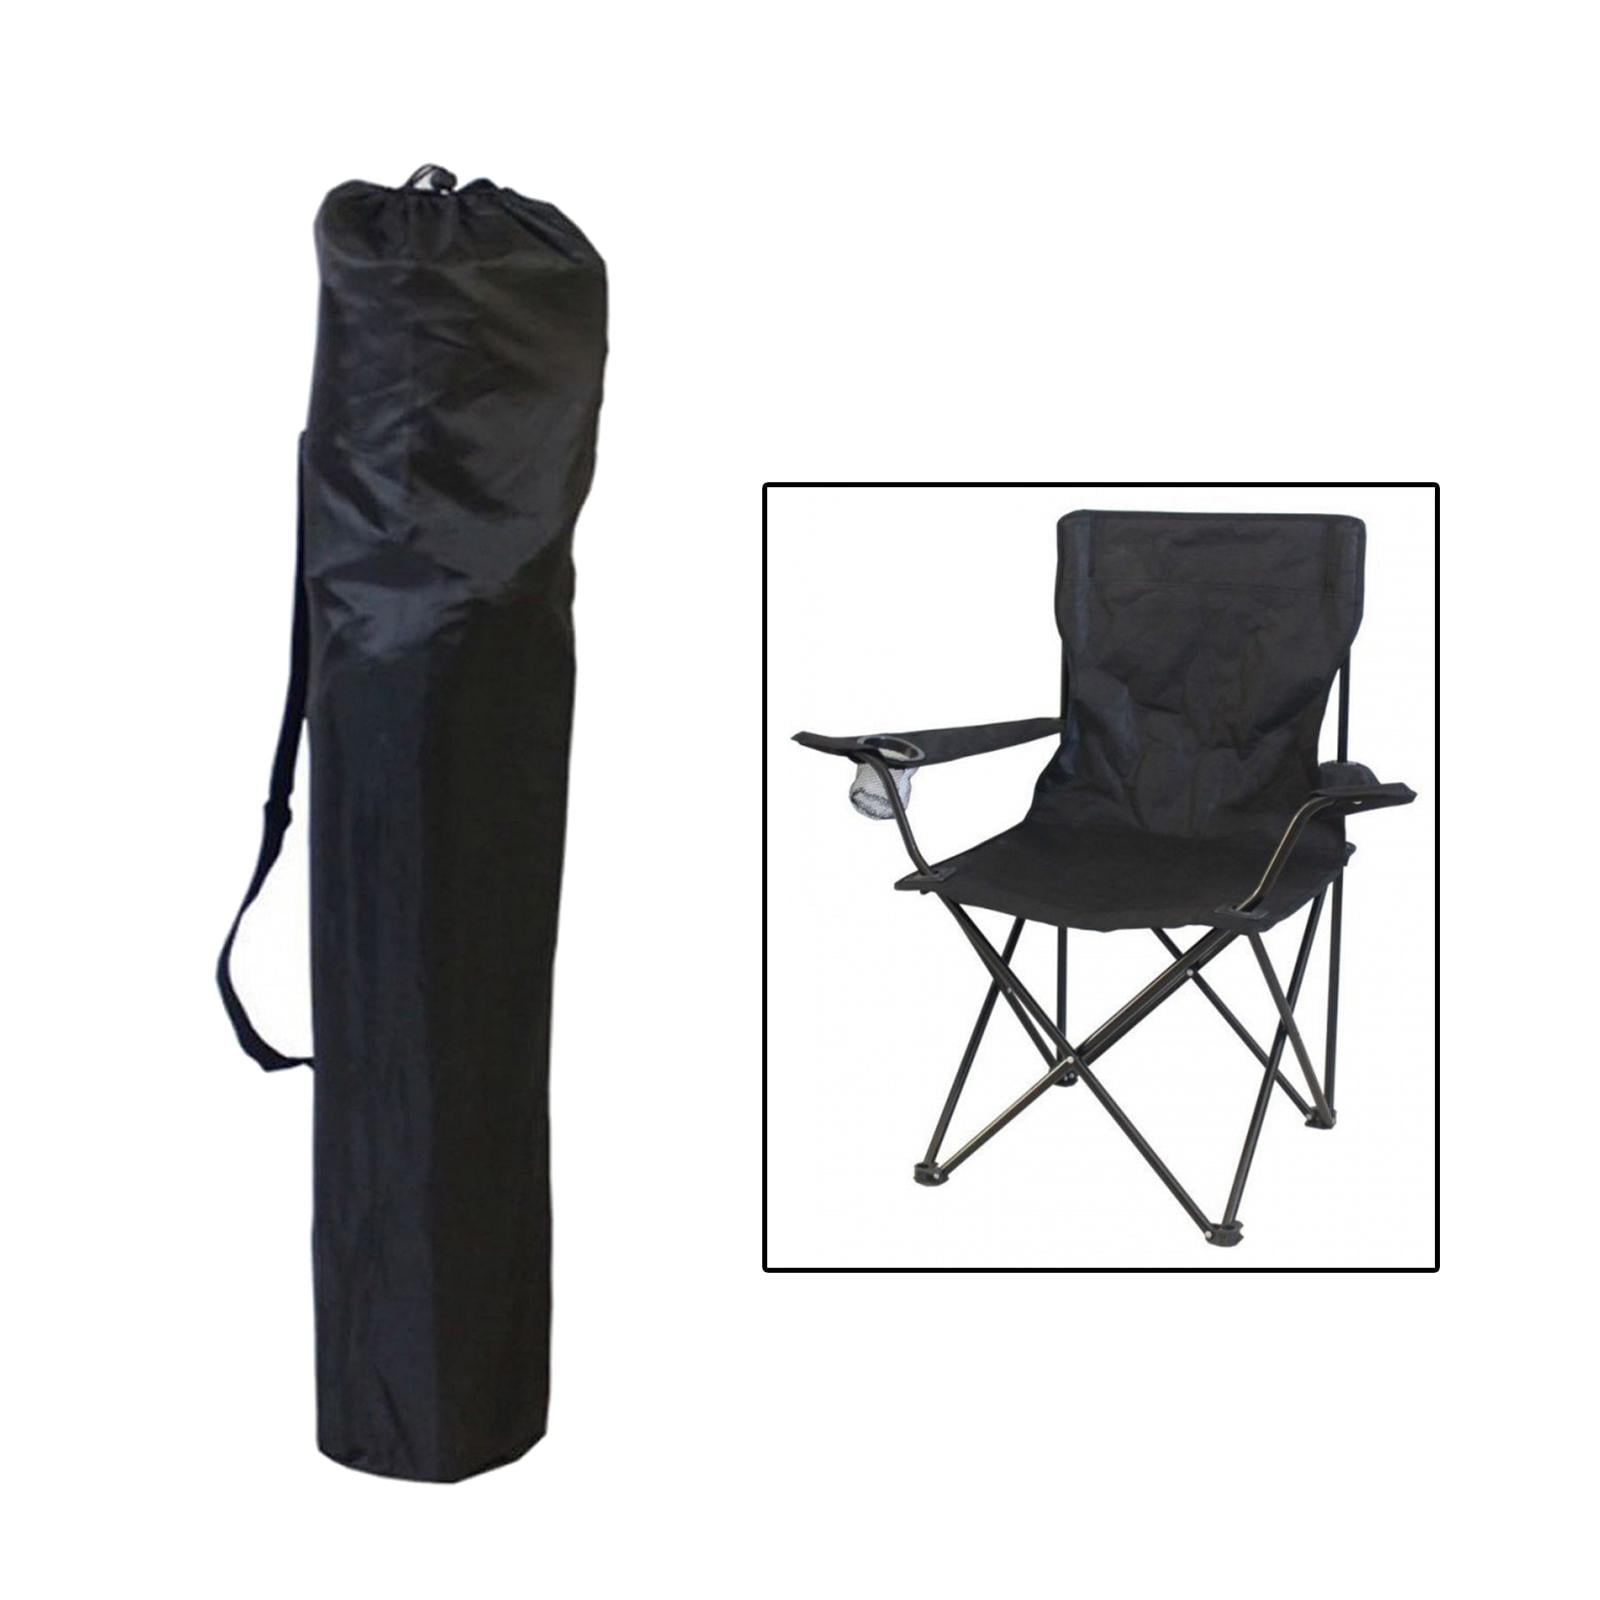 Portable Folding Camping Chair With Backrest, Garden Cushion Storage Bag,  And Fishing Stool Ideal For Outdoor Leisure And Beach Activities J230324  From Us_oklahoma, $11.1